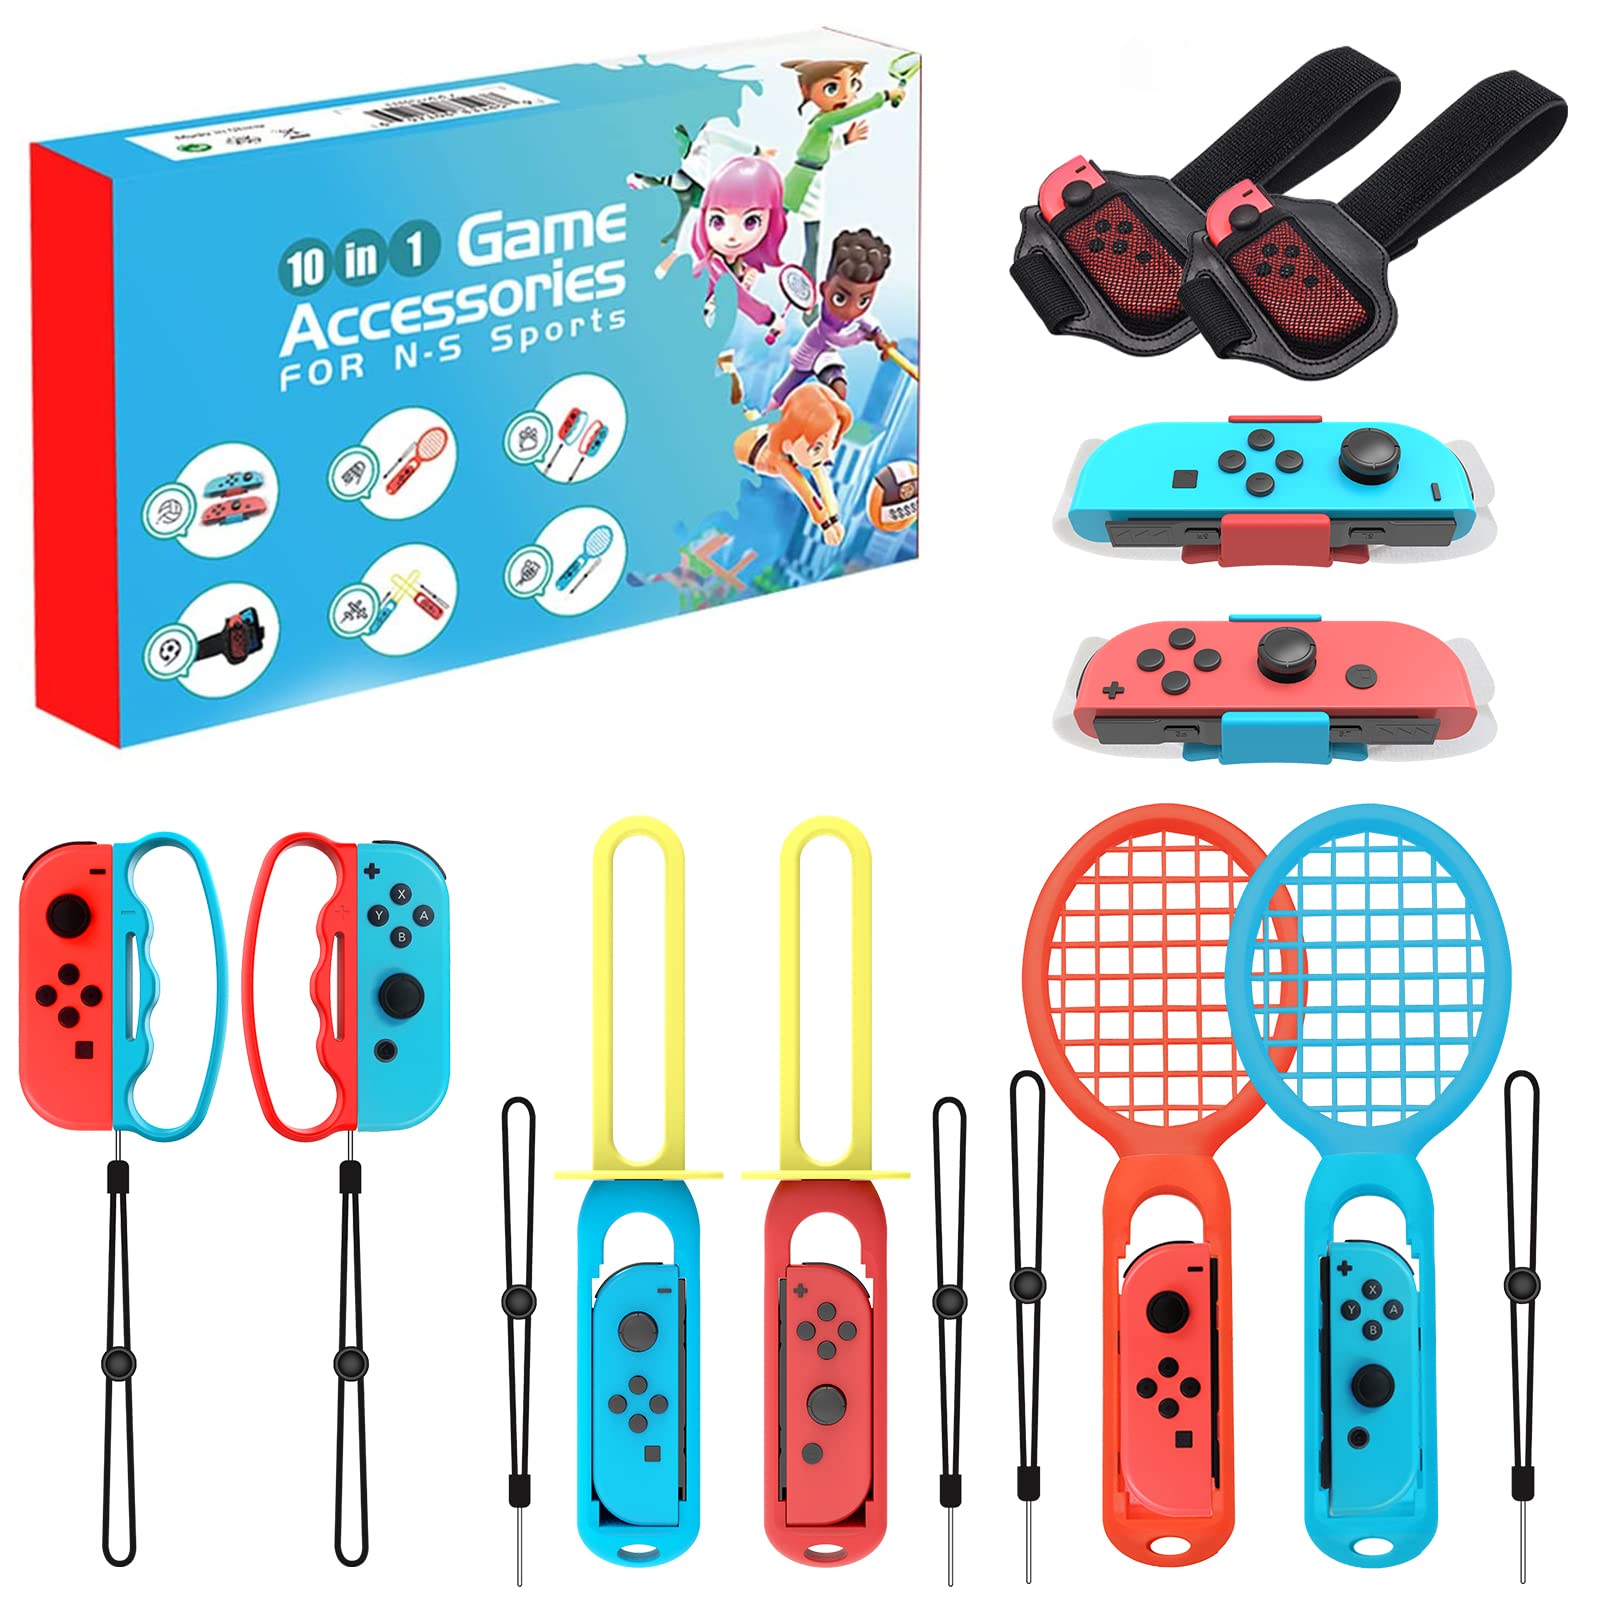 2022 Nintendo Switch Sports Accessories - 10 In 1 Party Pack Accessories Bundle For Joy-con Controller For Switch, Nintendo Switch Oled Accessories, Nintendo Switch Sports, Skyward Sword Switch